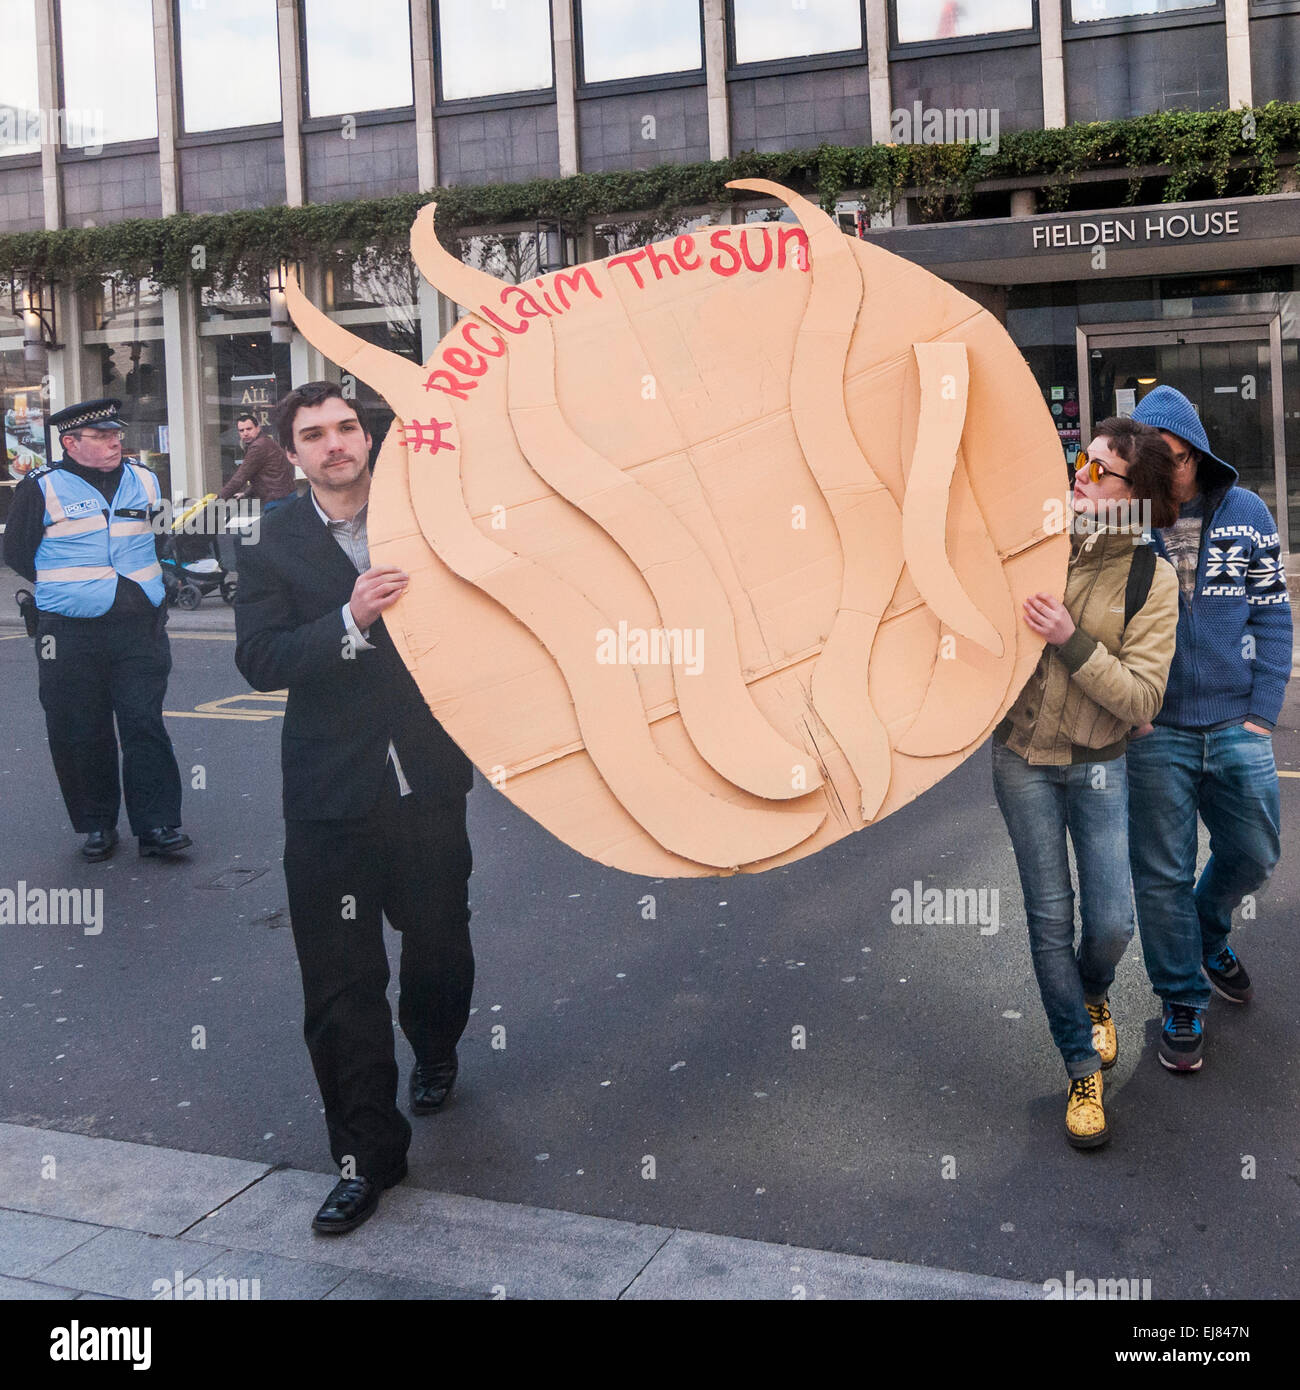 London Bridge Station, London, UK.  23rd March, 2015. Demonstrators gather with their placards outside News UK's headquarters, 'the Little Shard' near London Bridge as part of the Occupy Rupert Murdoch protest.  The protest is against the dominance of billionaire owners of UK media: Rupert Murdoch (News UK), Viscount Rothermere (Daily Mail Group), Richard Desmond (The Express) and the Barclay brothers (Telegraph). Credit:  Stephen Chung/Alamy Live News Stock Photo